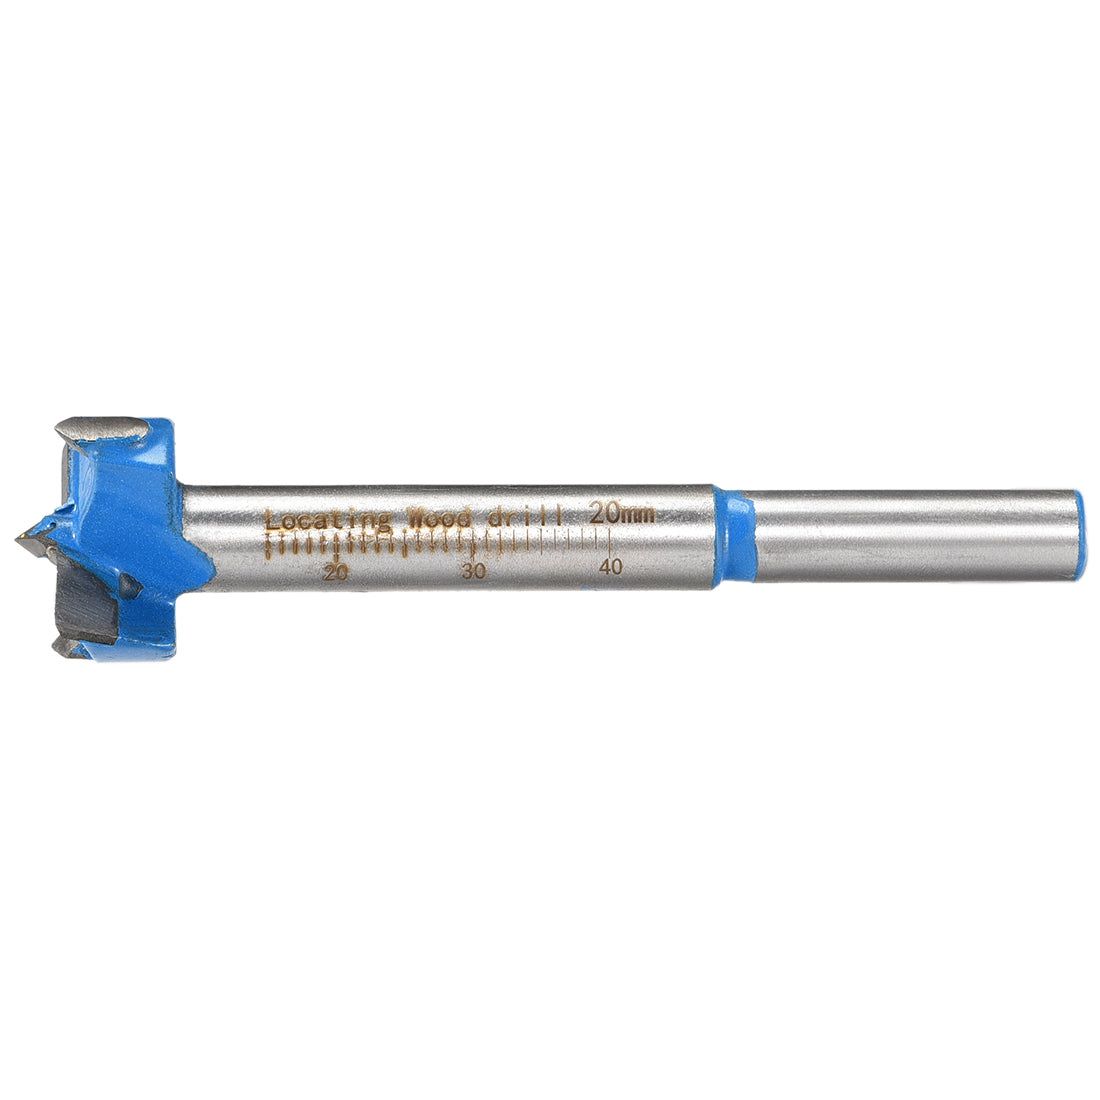 uxcell Uxcell Forstner Wood Boring Drill Bit 20mm Dia. Hole Saw Carbide Alloy Steel Tip Round Shank Cutting for Hinge Plywood Wood Tool Blue 1Set